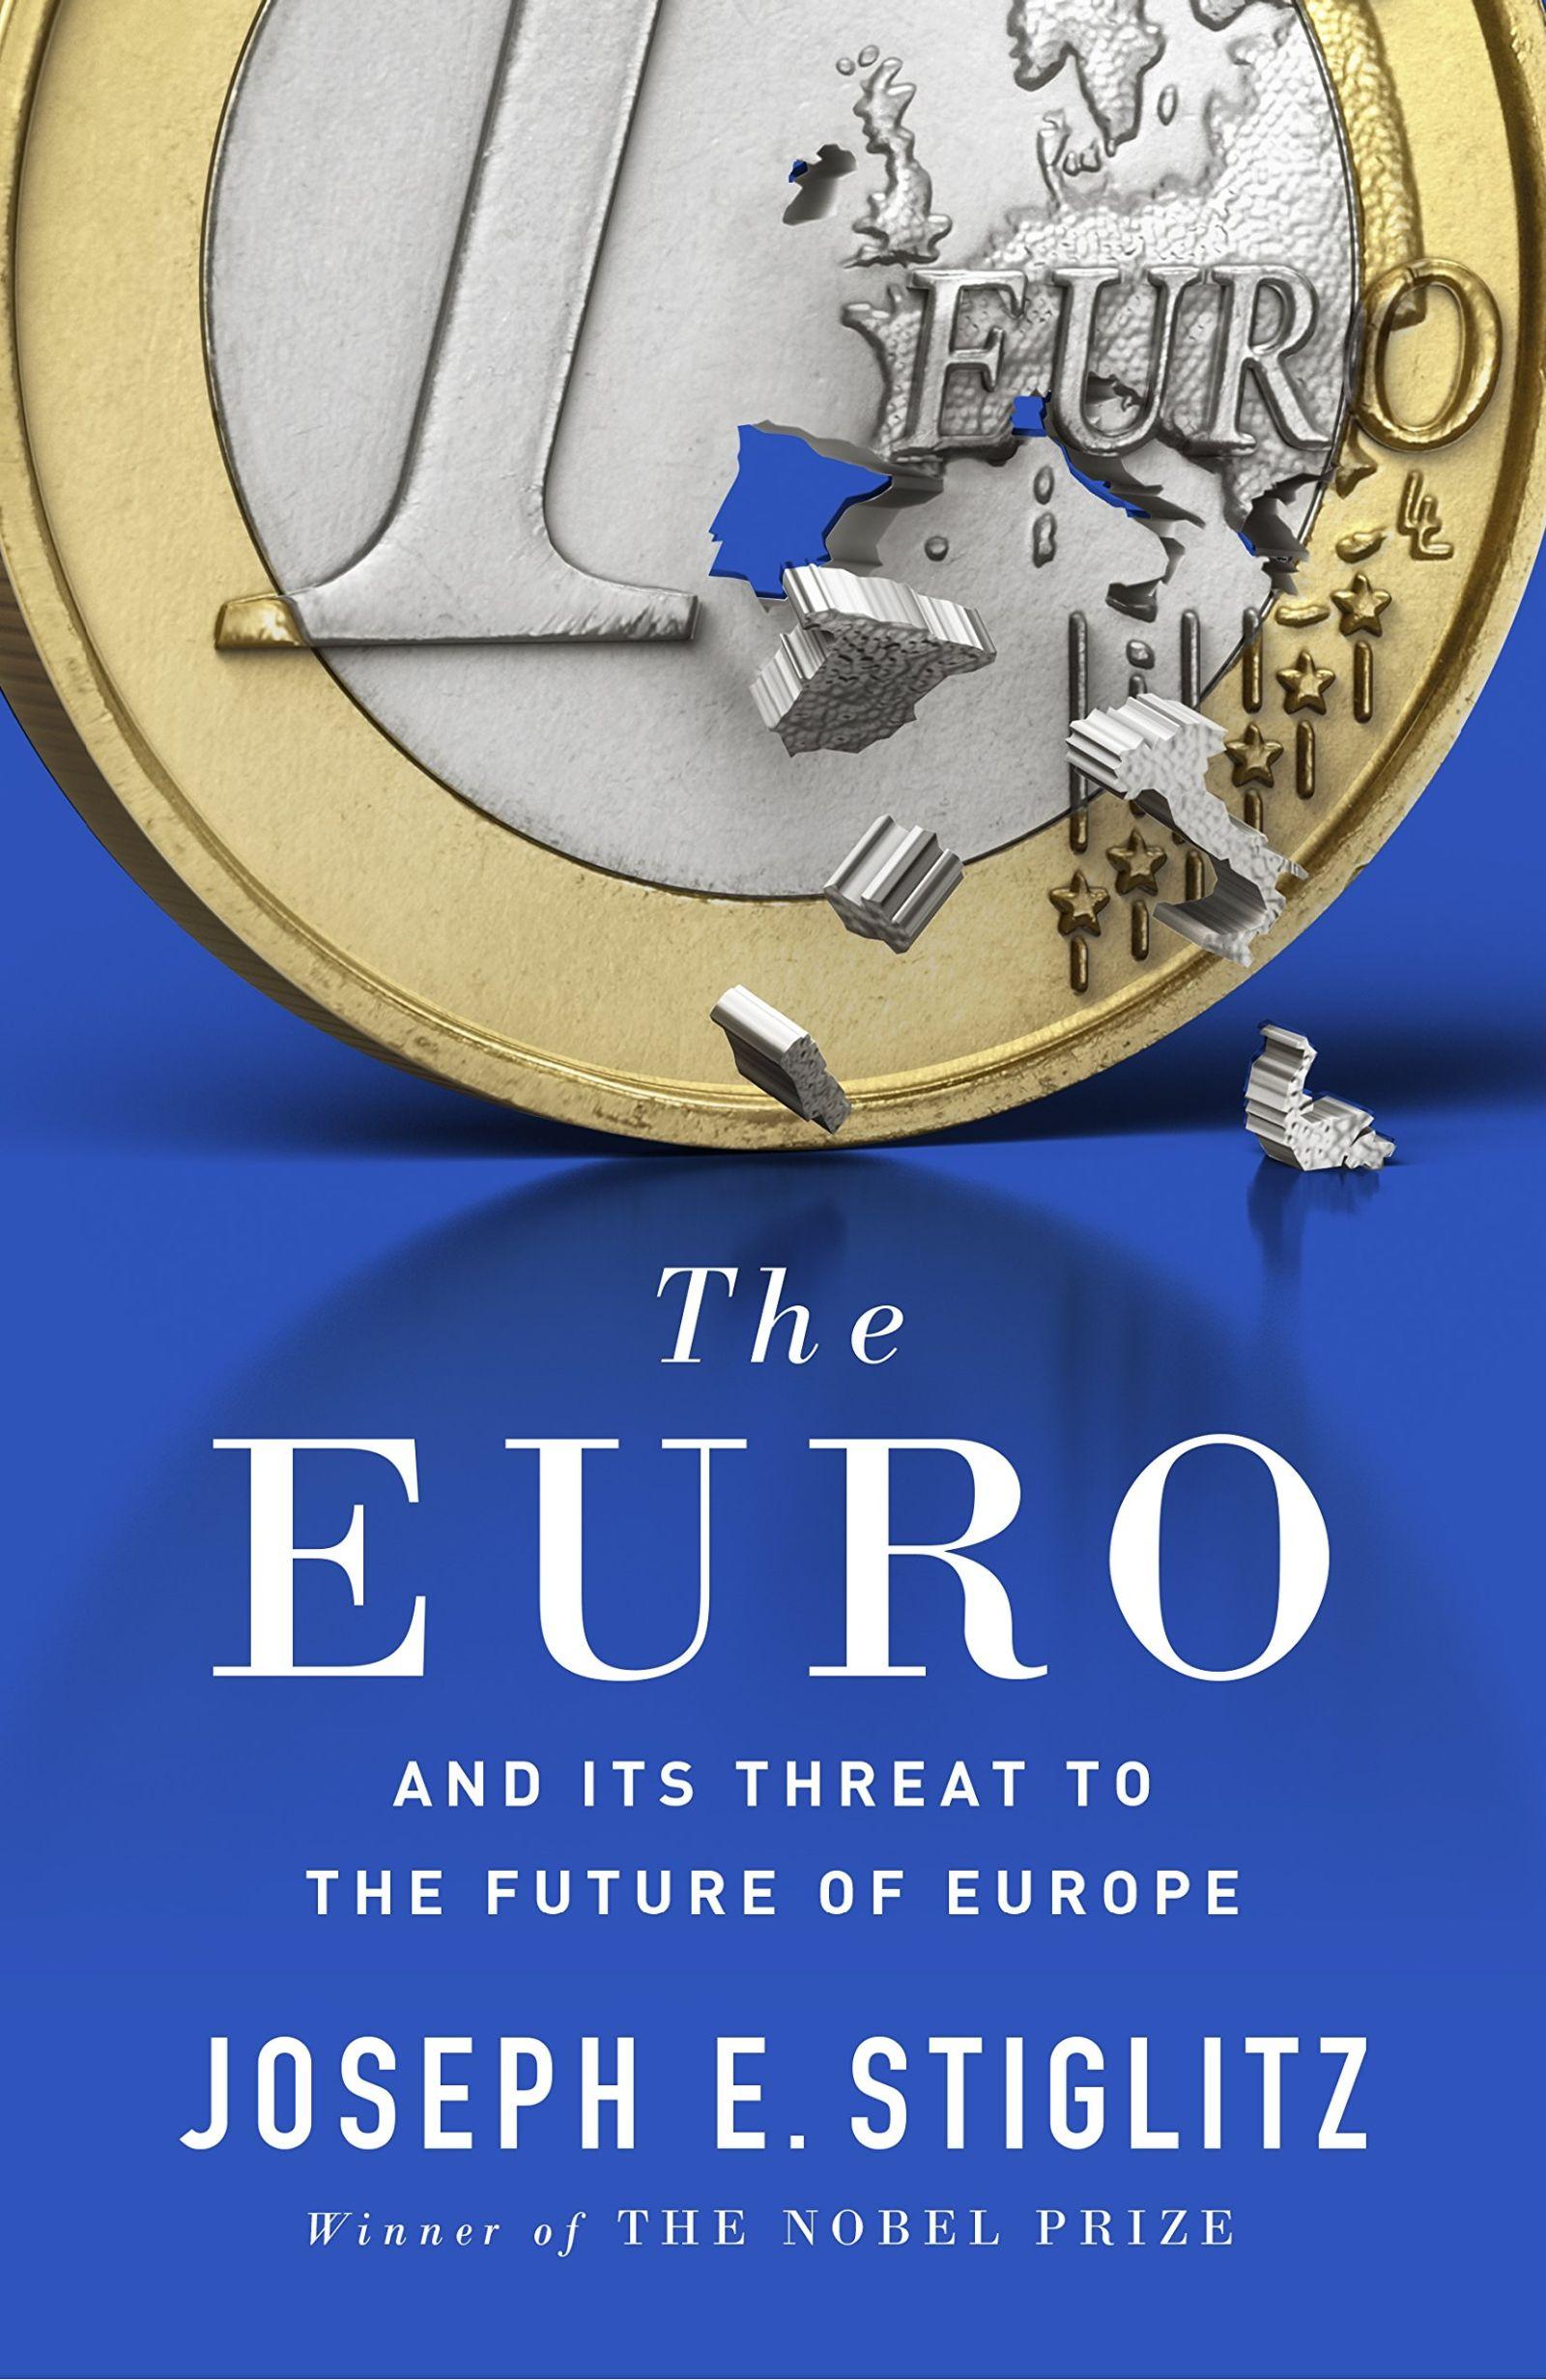 Euro: and Its Threat to the Future of Europe